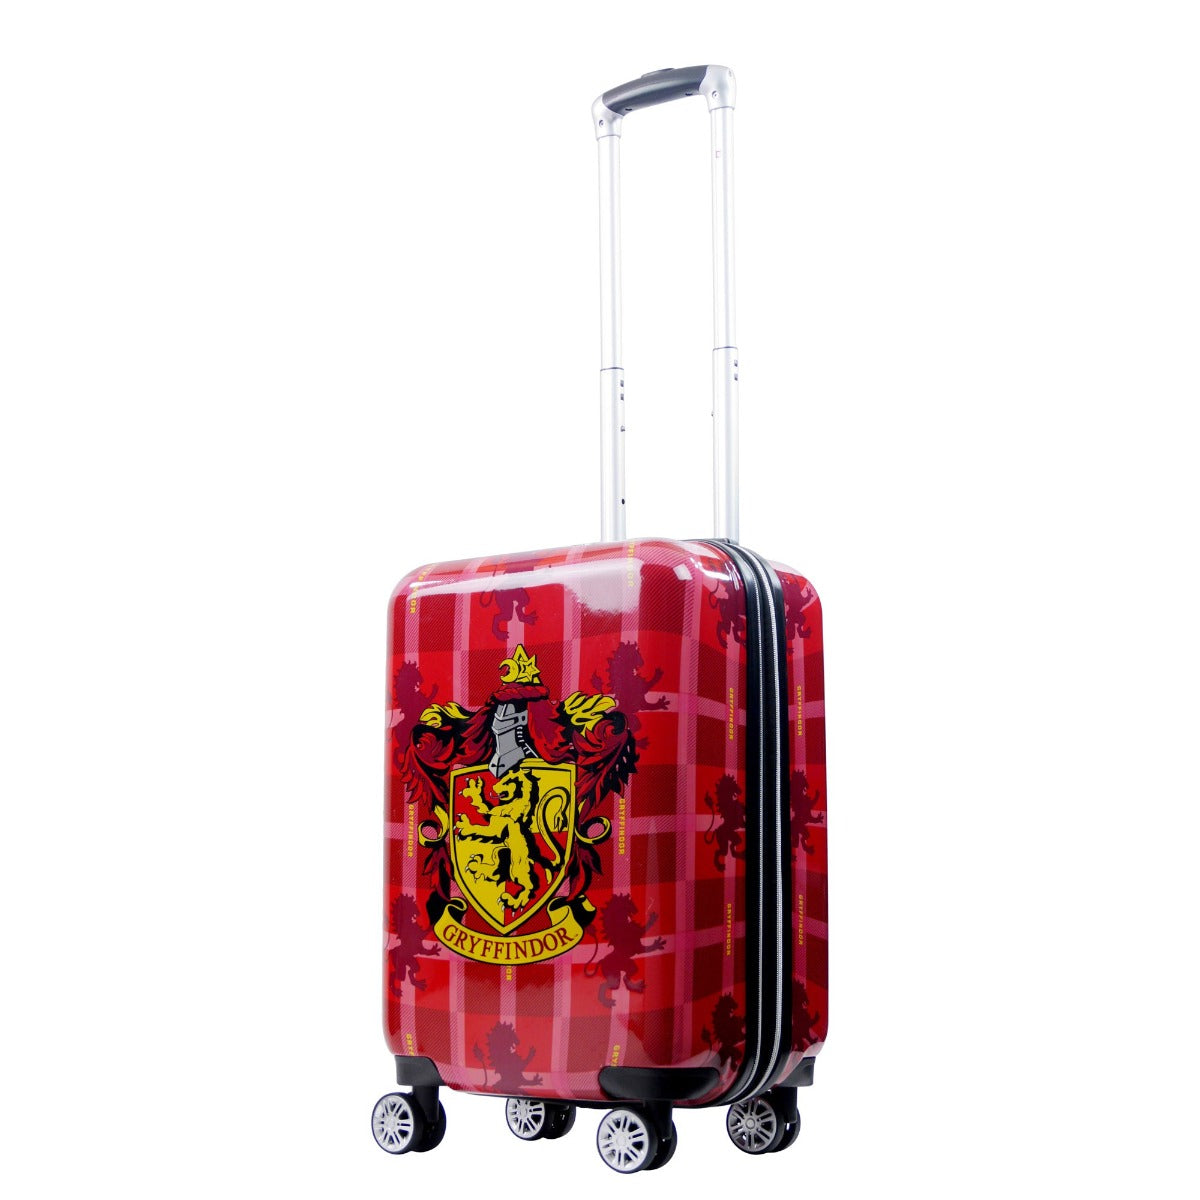 Red Harry Potter Gryffindor 22" carry-on hardside spinner suitcase luggage - best suitcases for traveling